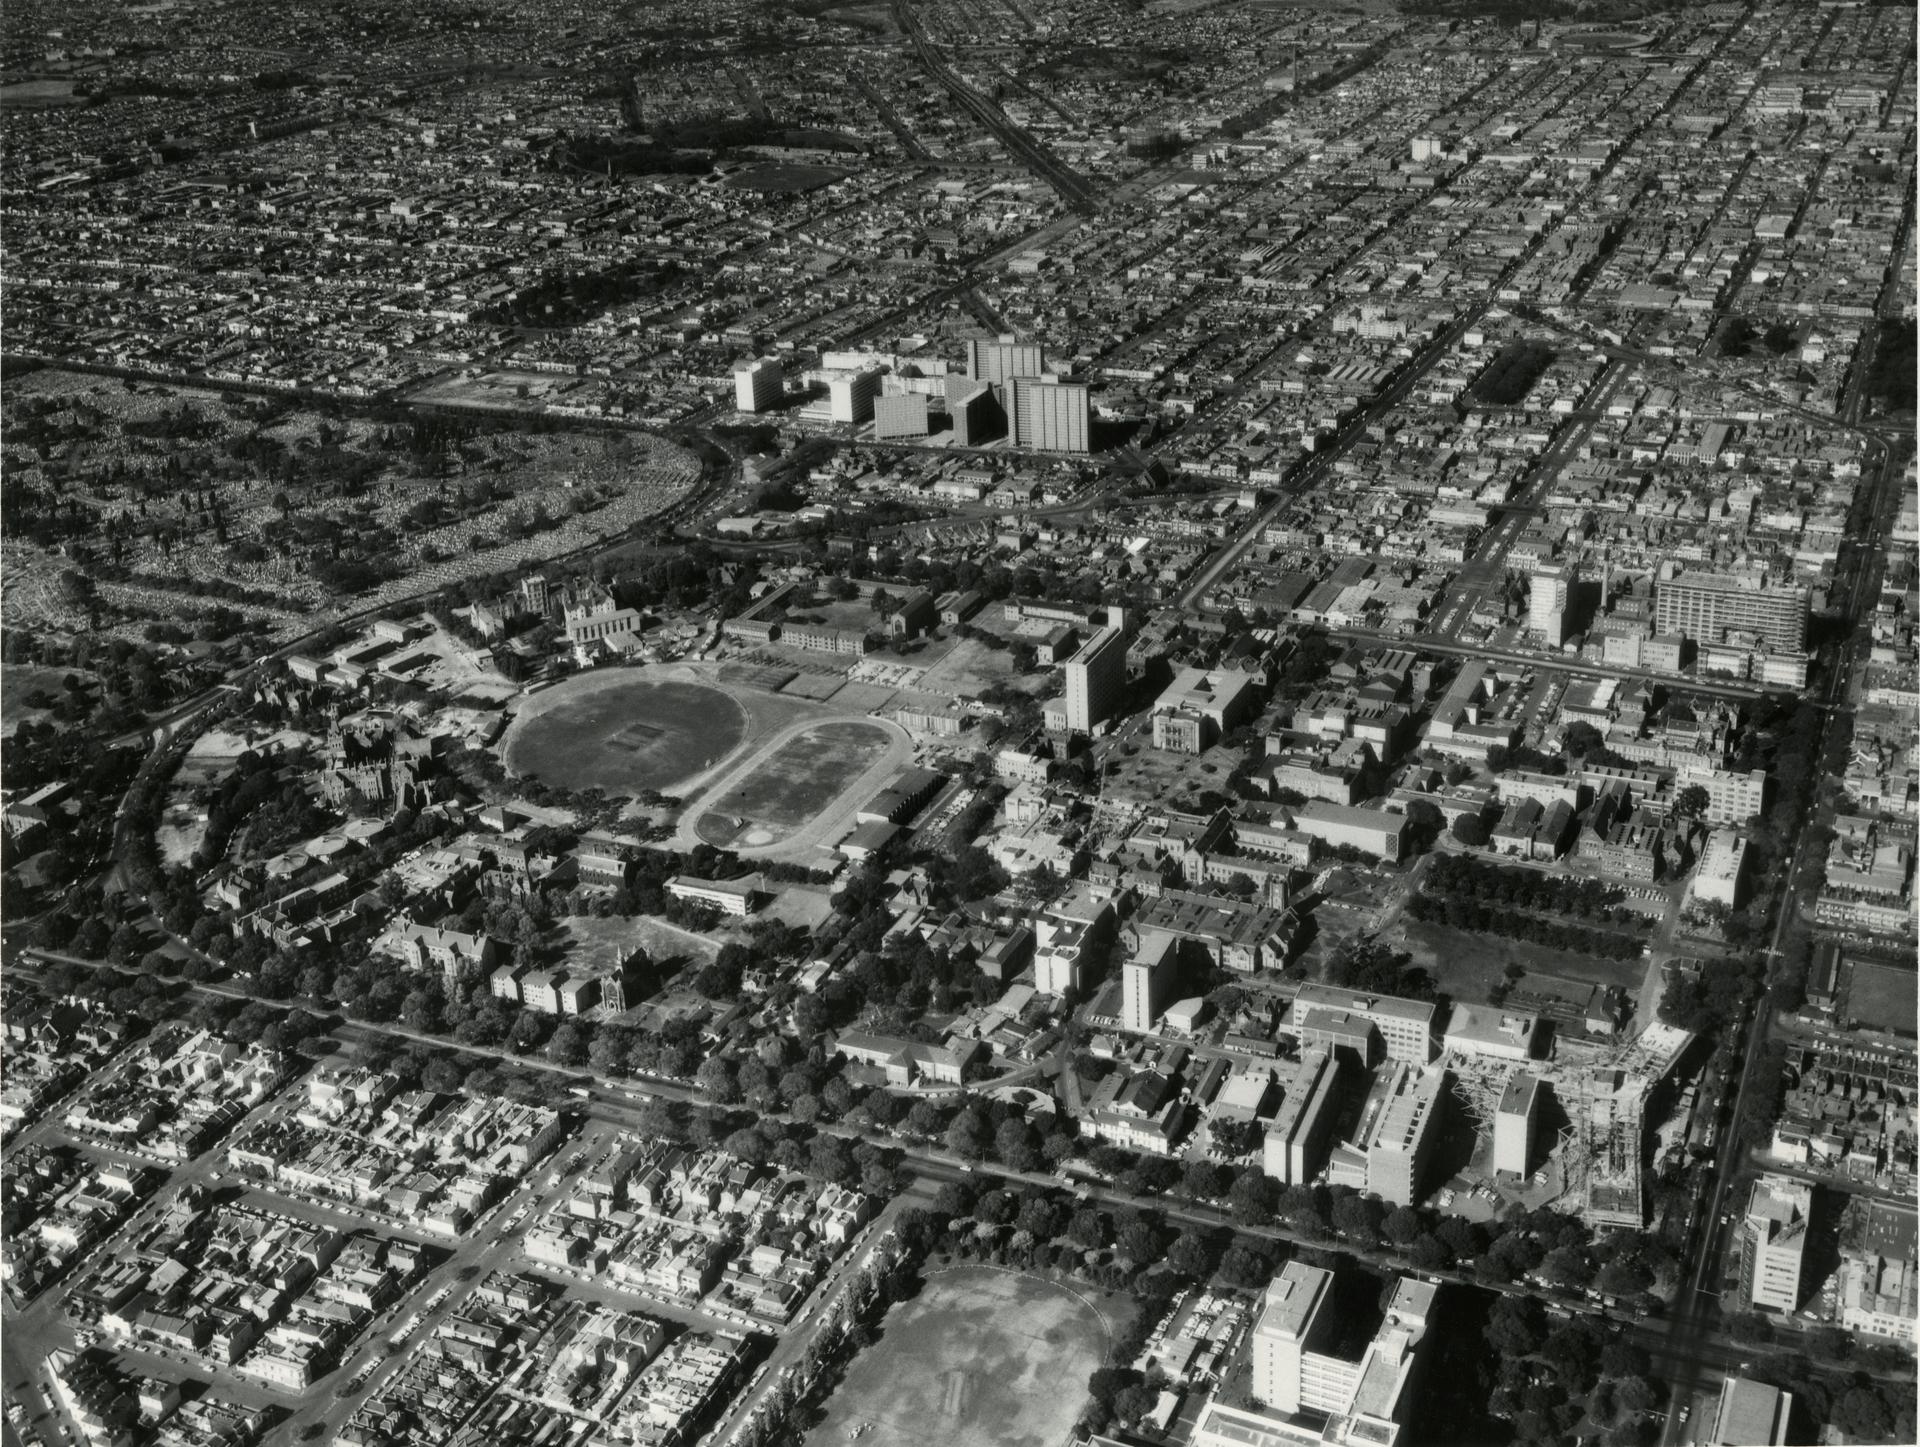 Aerial view showing the Medical precinct building in stages of completion, 1960s